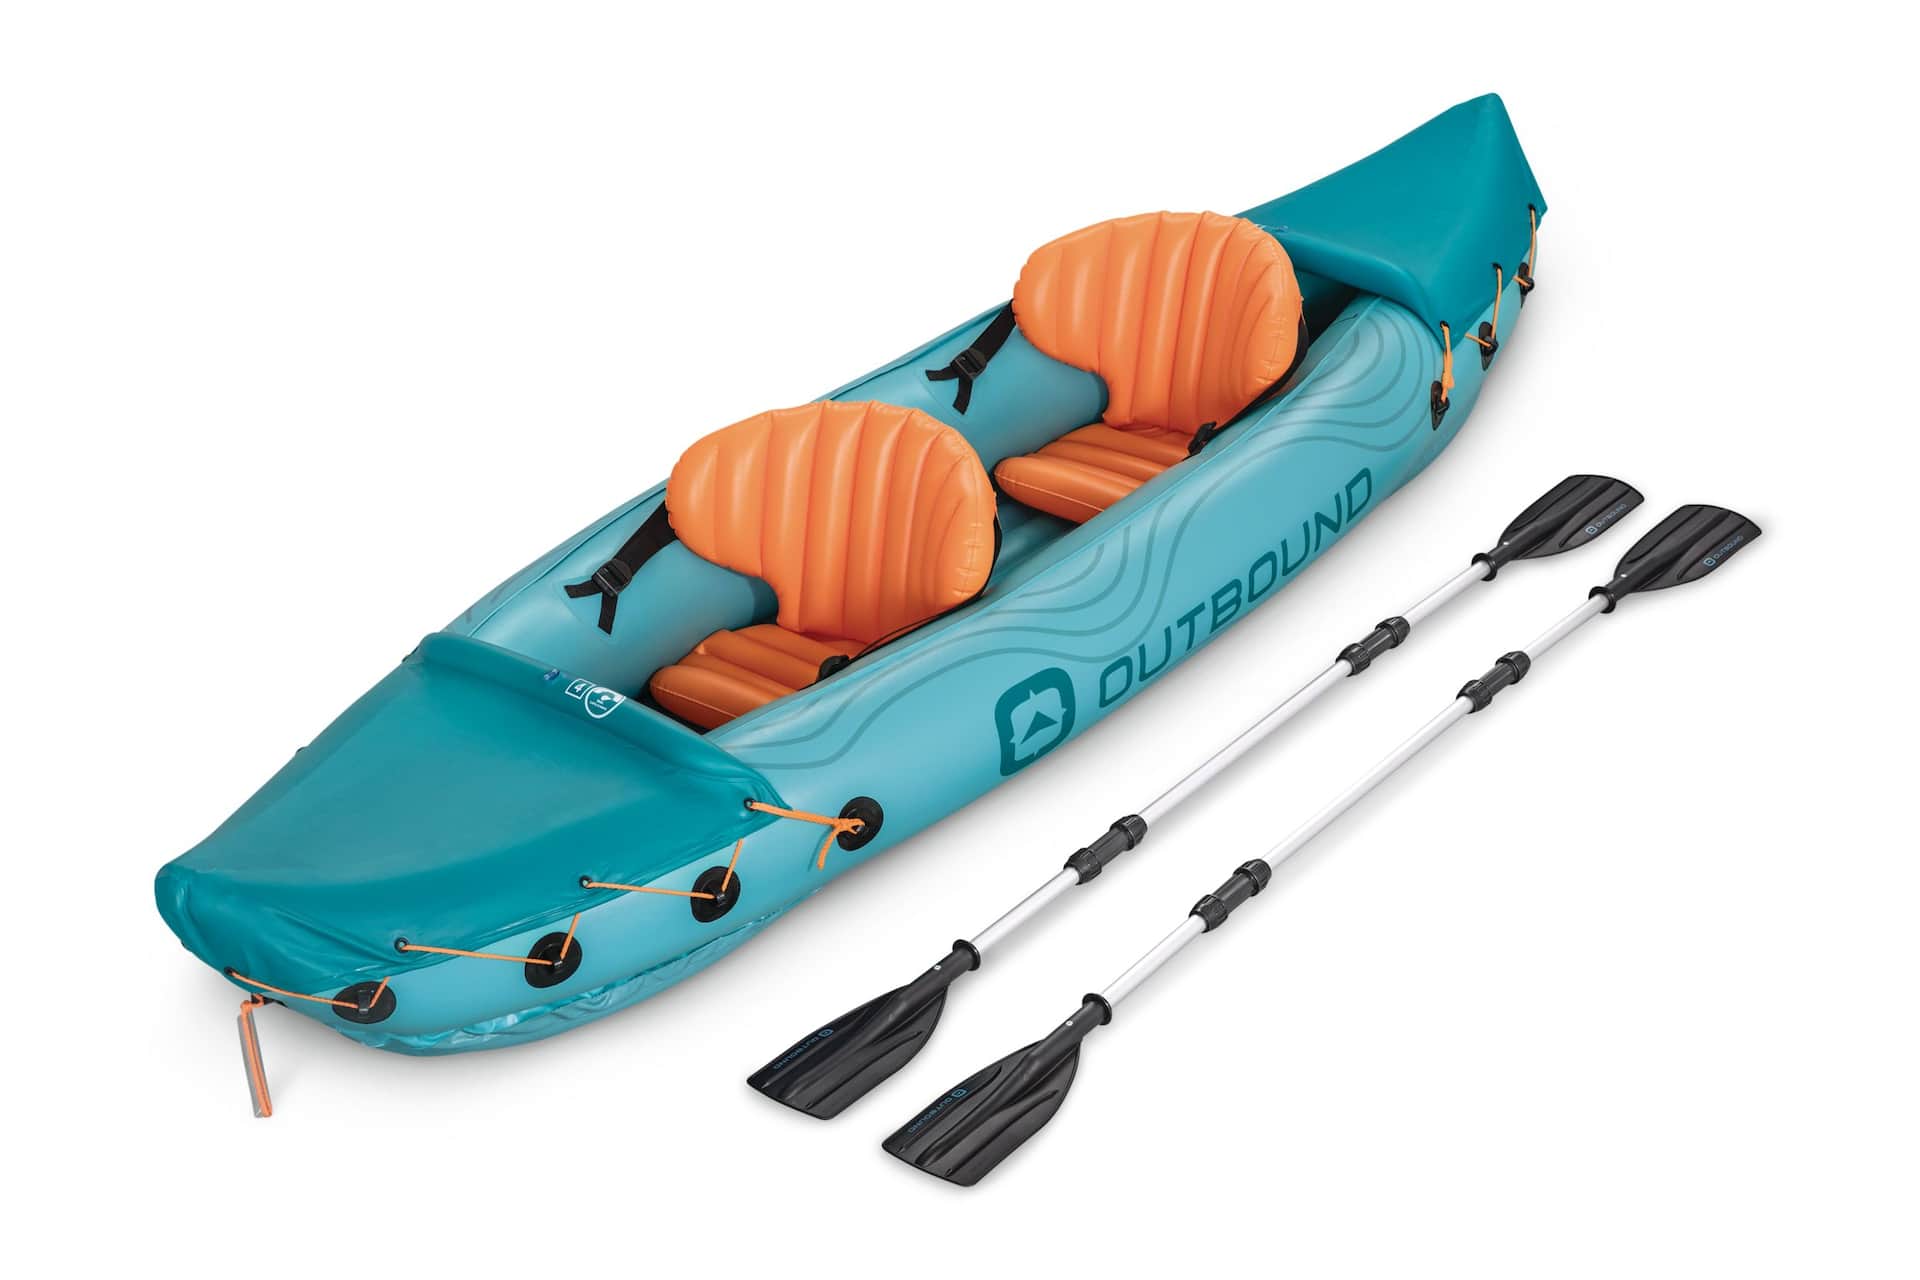 https://media-www.canadiantire.ca/product/playing/seasonal-recreation/marine-water-fun/0792053/outbound-inflatable-kayak-2-person-65016358-02ac-4a4b-8afa-7575da43e088-jpgrendition.jpg